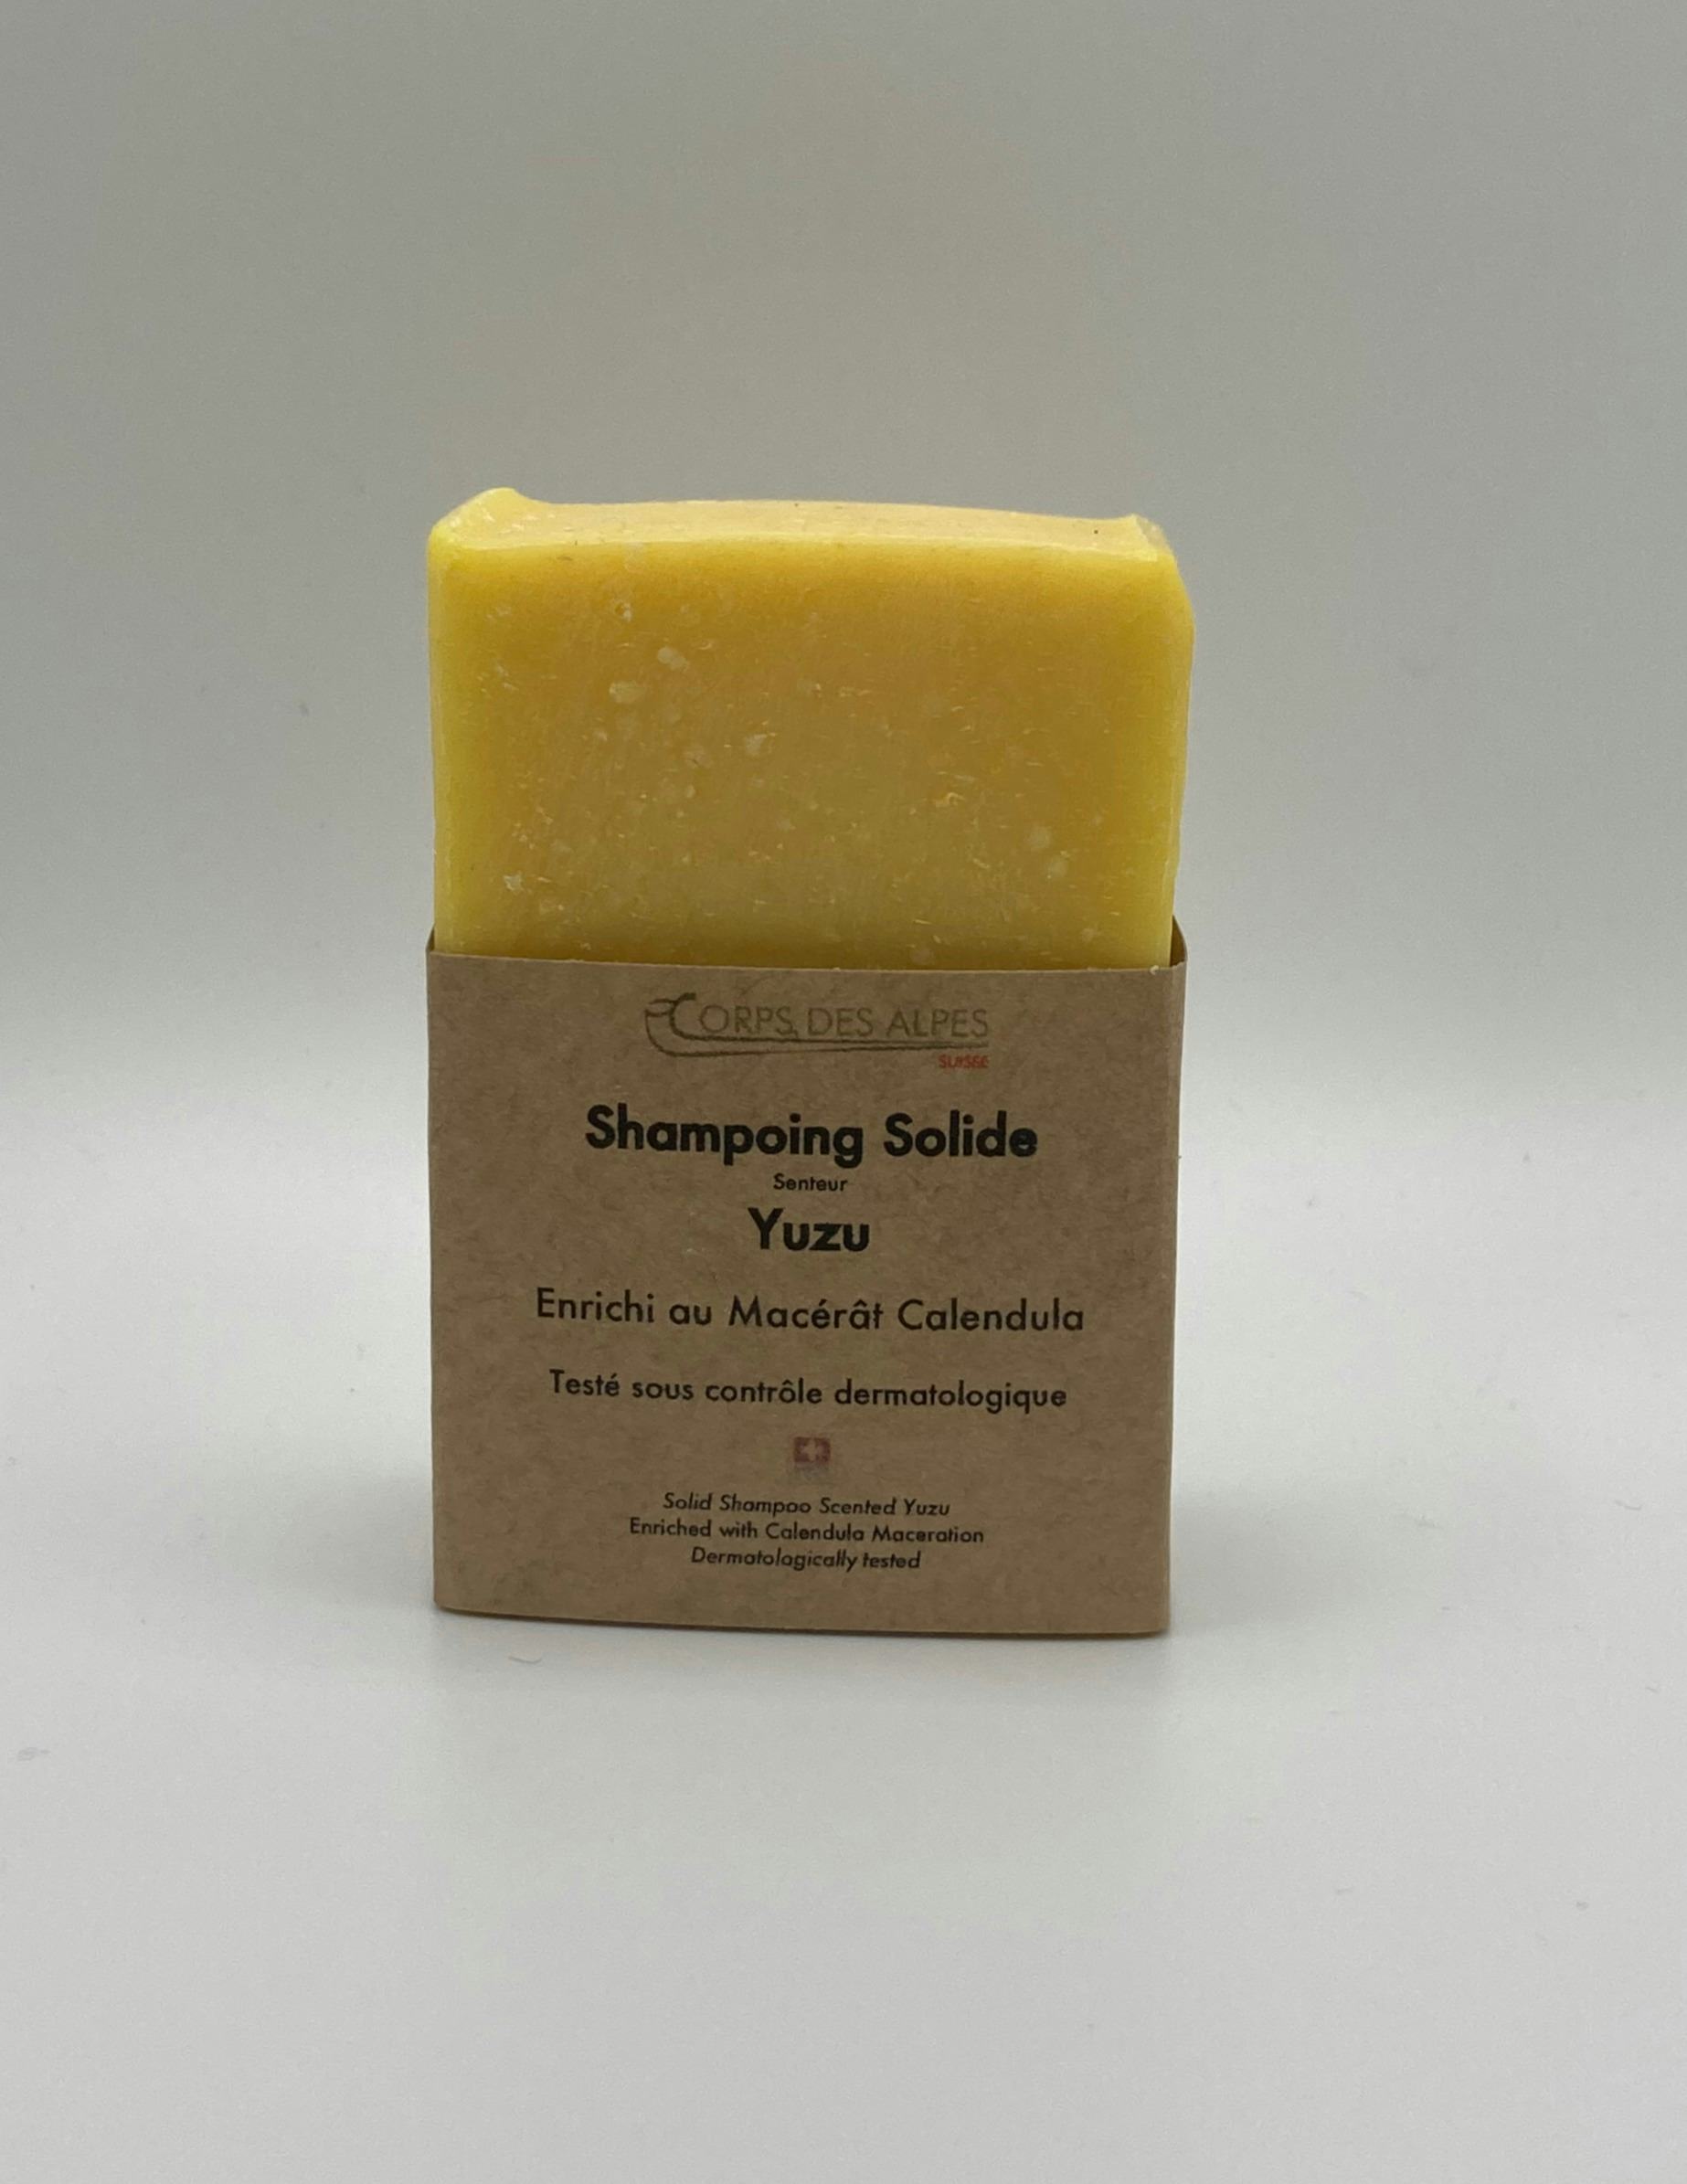 Yuzu scent solid shampoo, artisanal product for direct sale in Switzerland